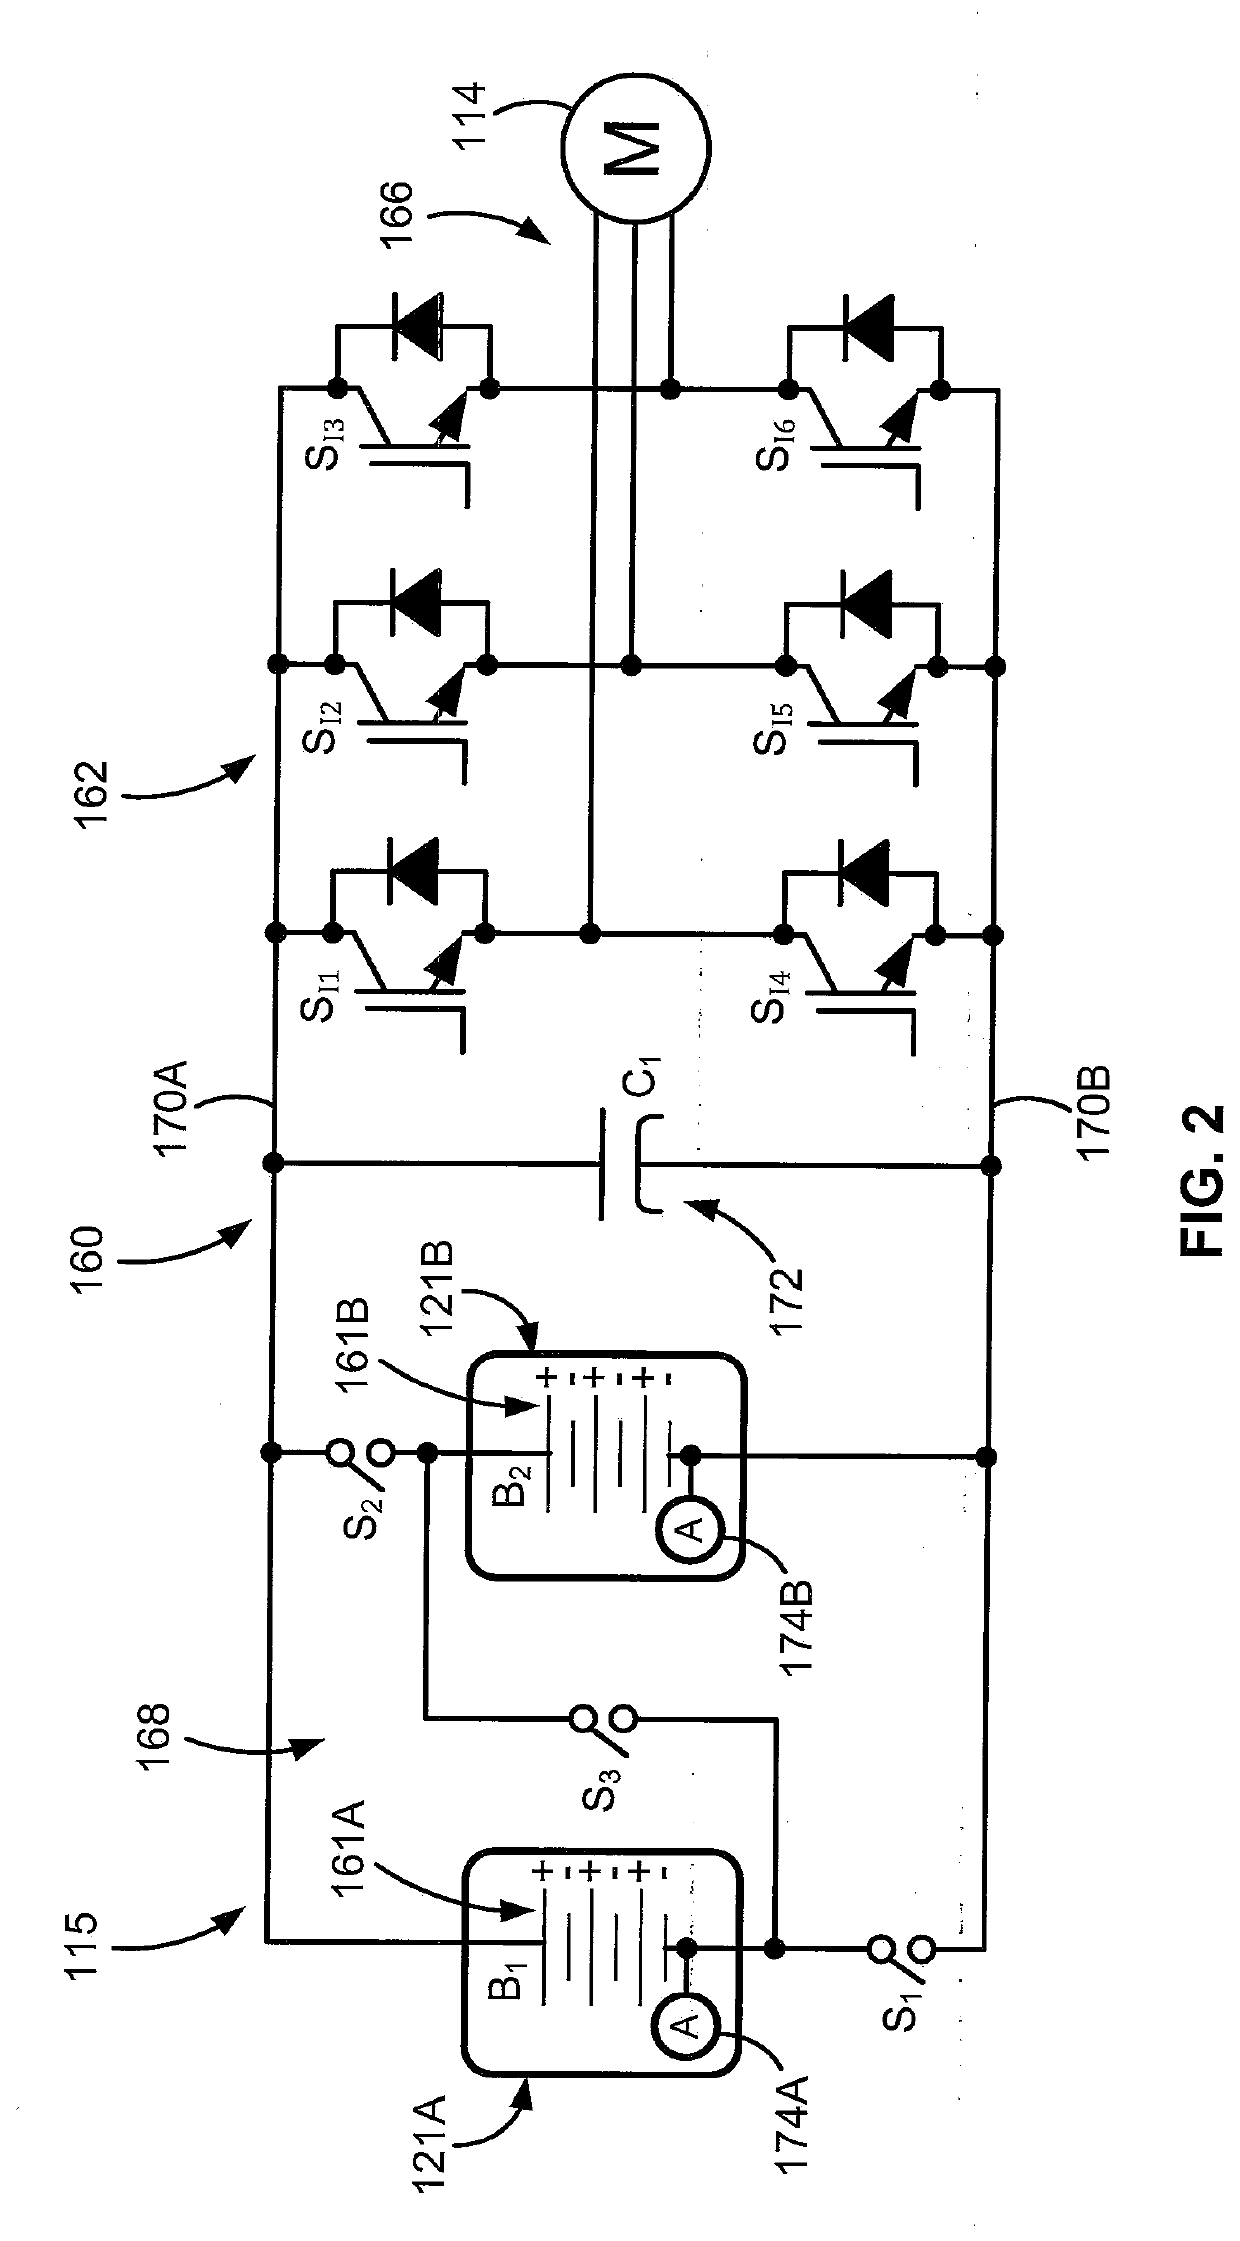 Electric-drive vehicles, powertrains, and logic for comprehensive vehicle control during towing